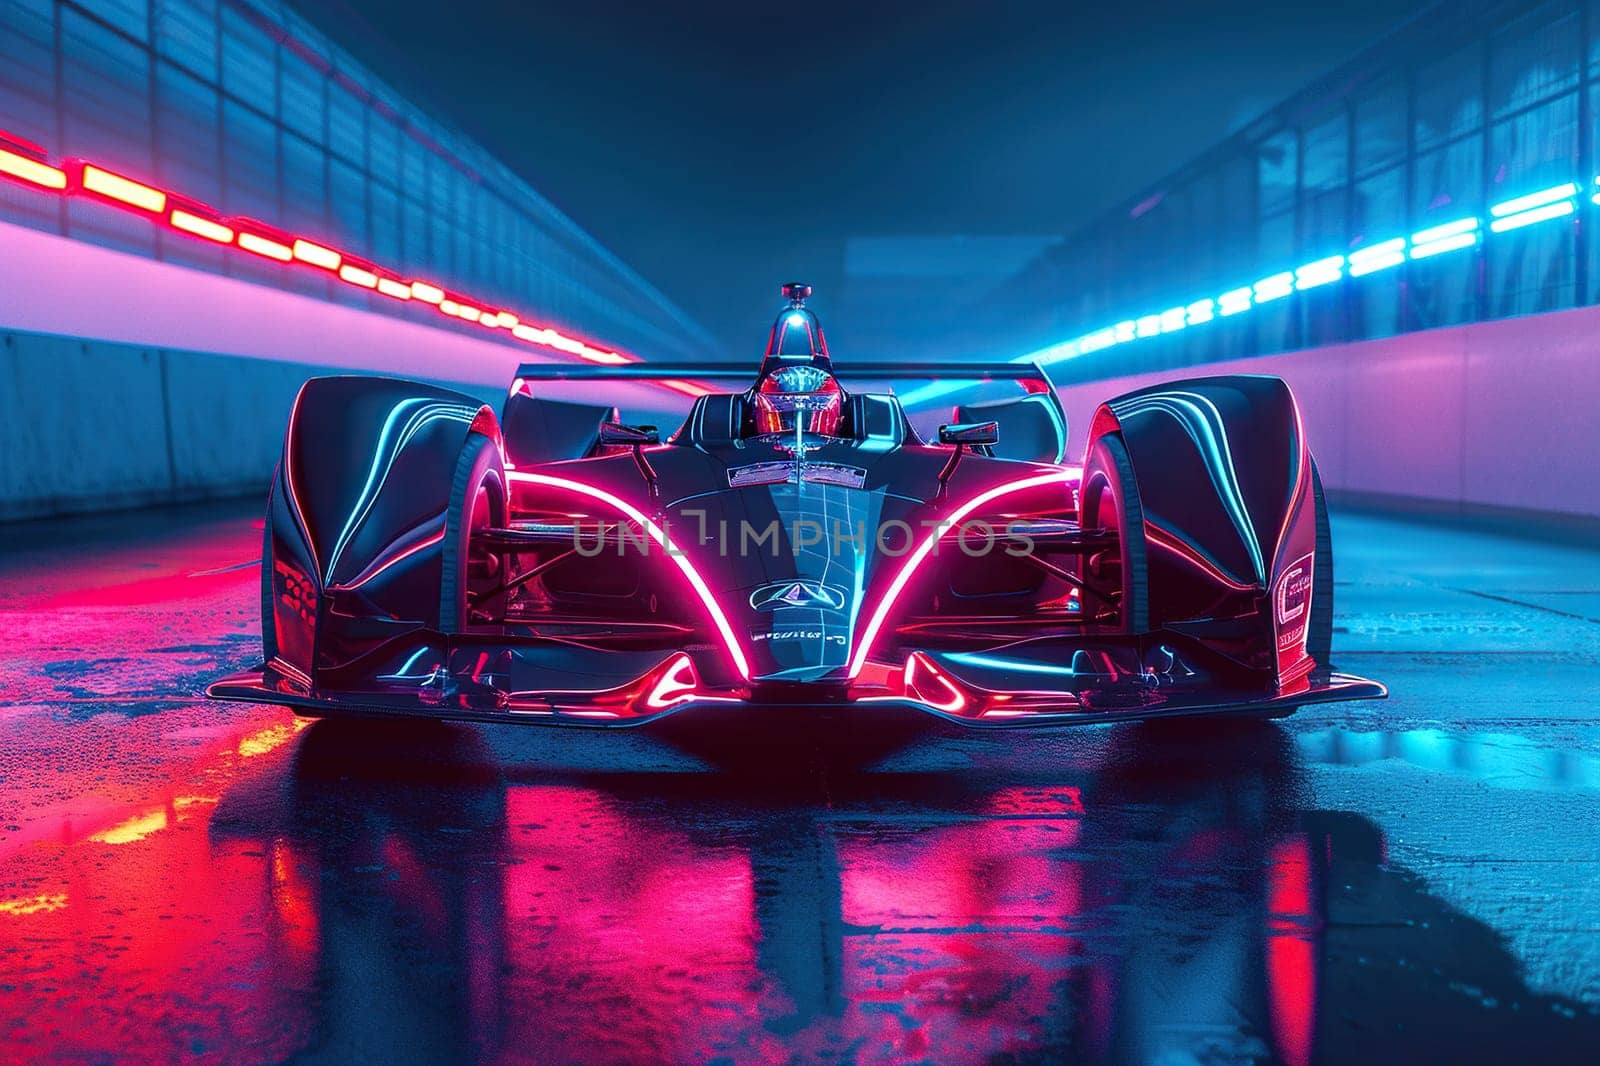 Racing car on the track in neon light with a motion effect. Concept of high speed, auto racing.